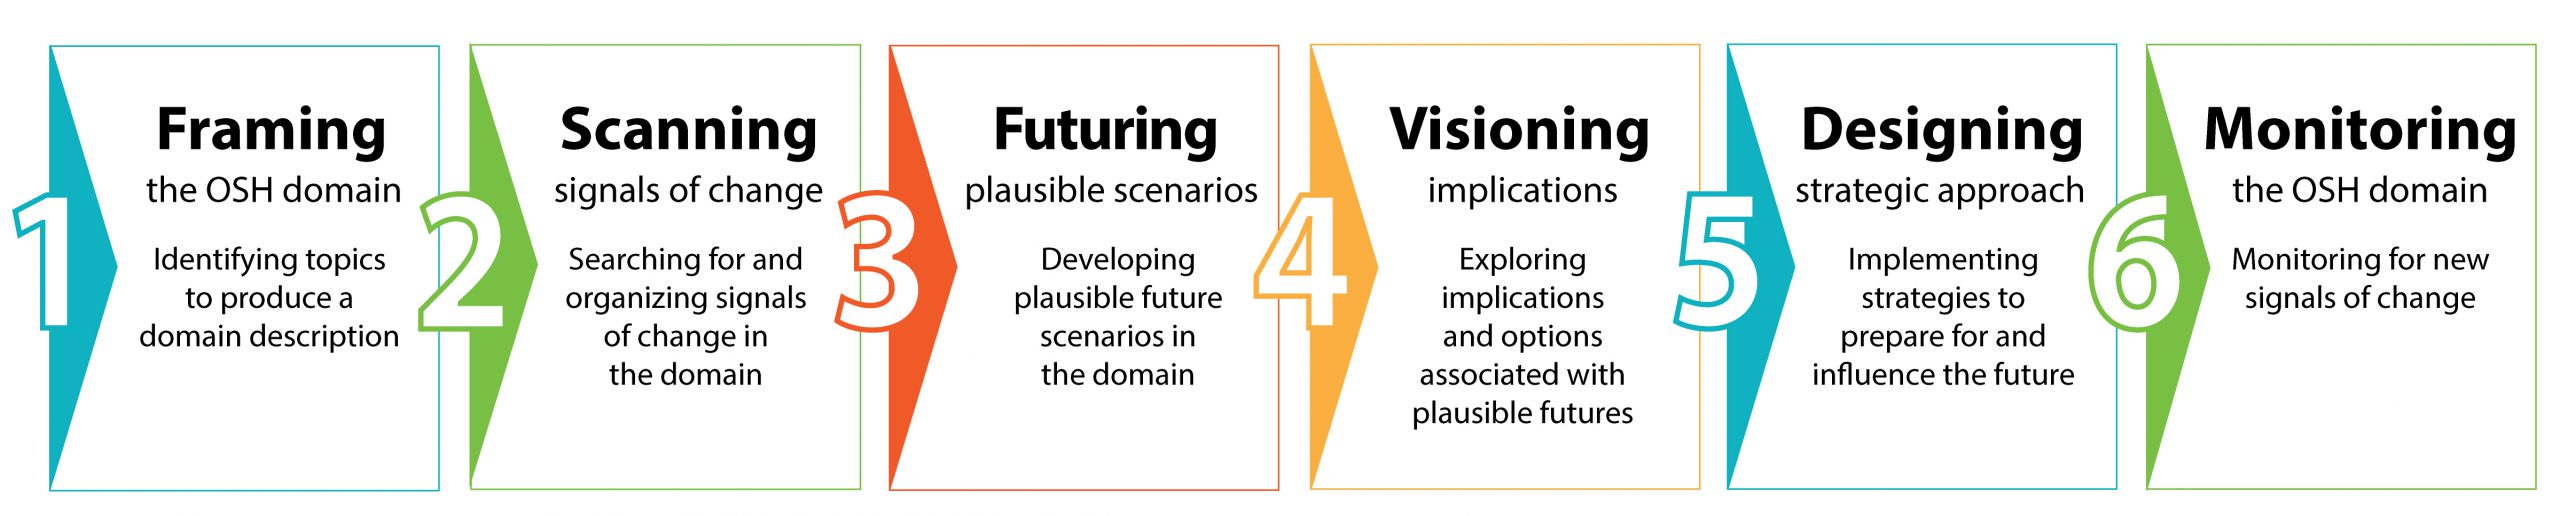 Guidelines for Strategic Foresight Thinking about the Future 